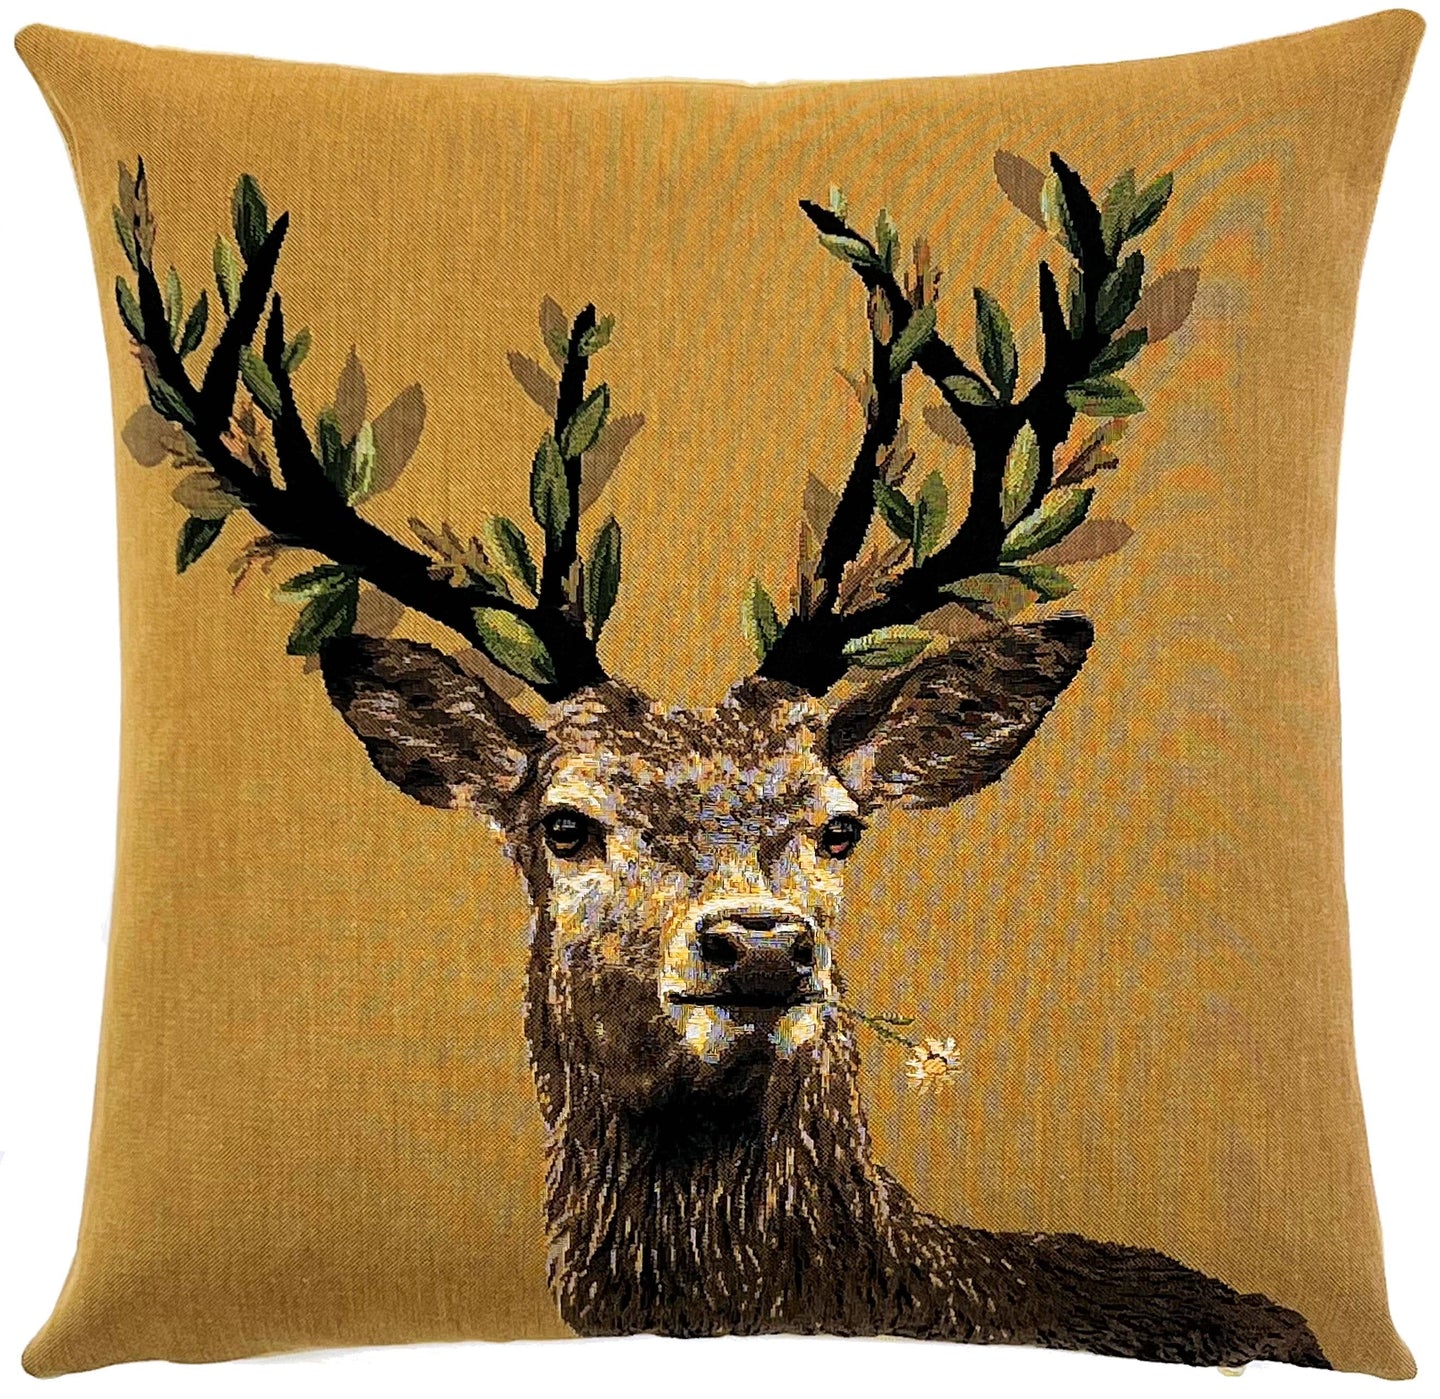 Decorative Pillow Cover - Stag